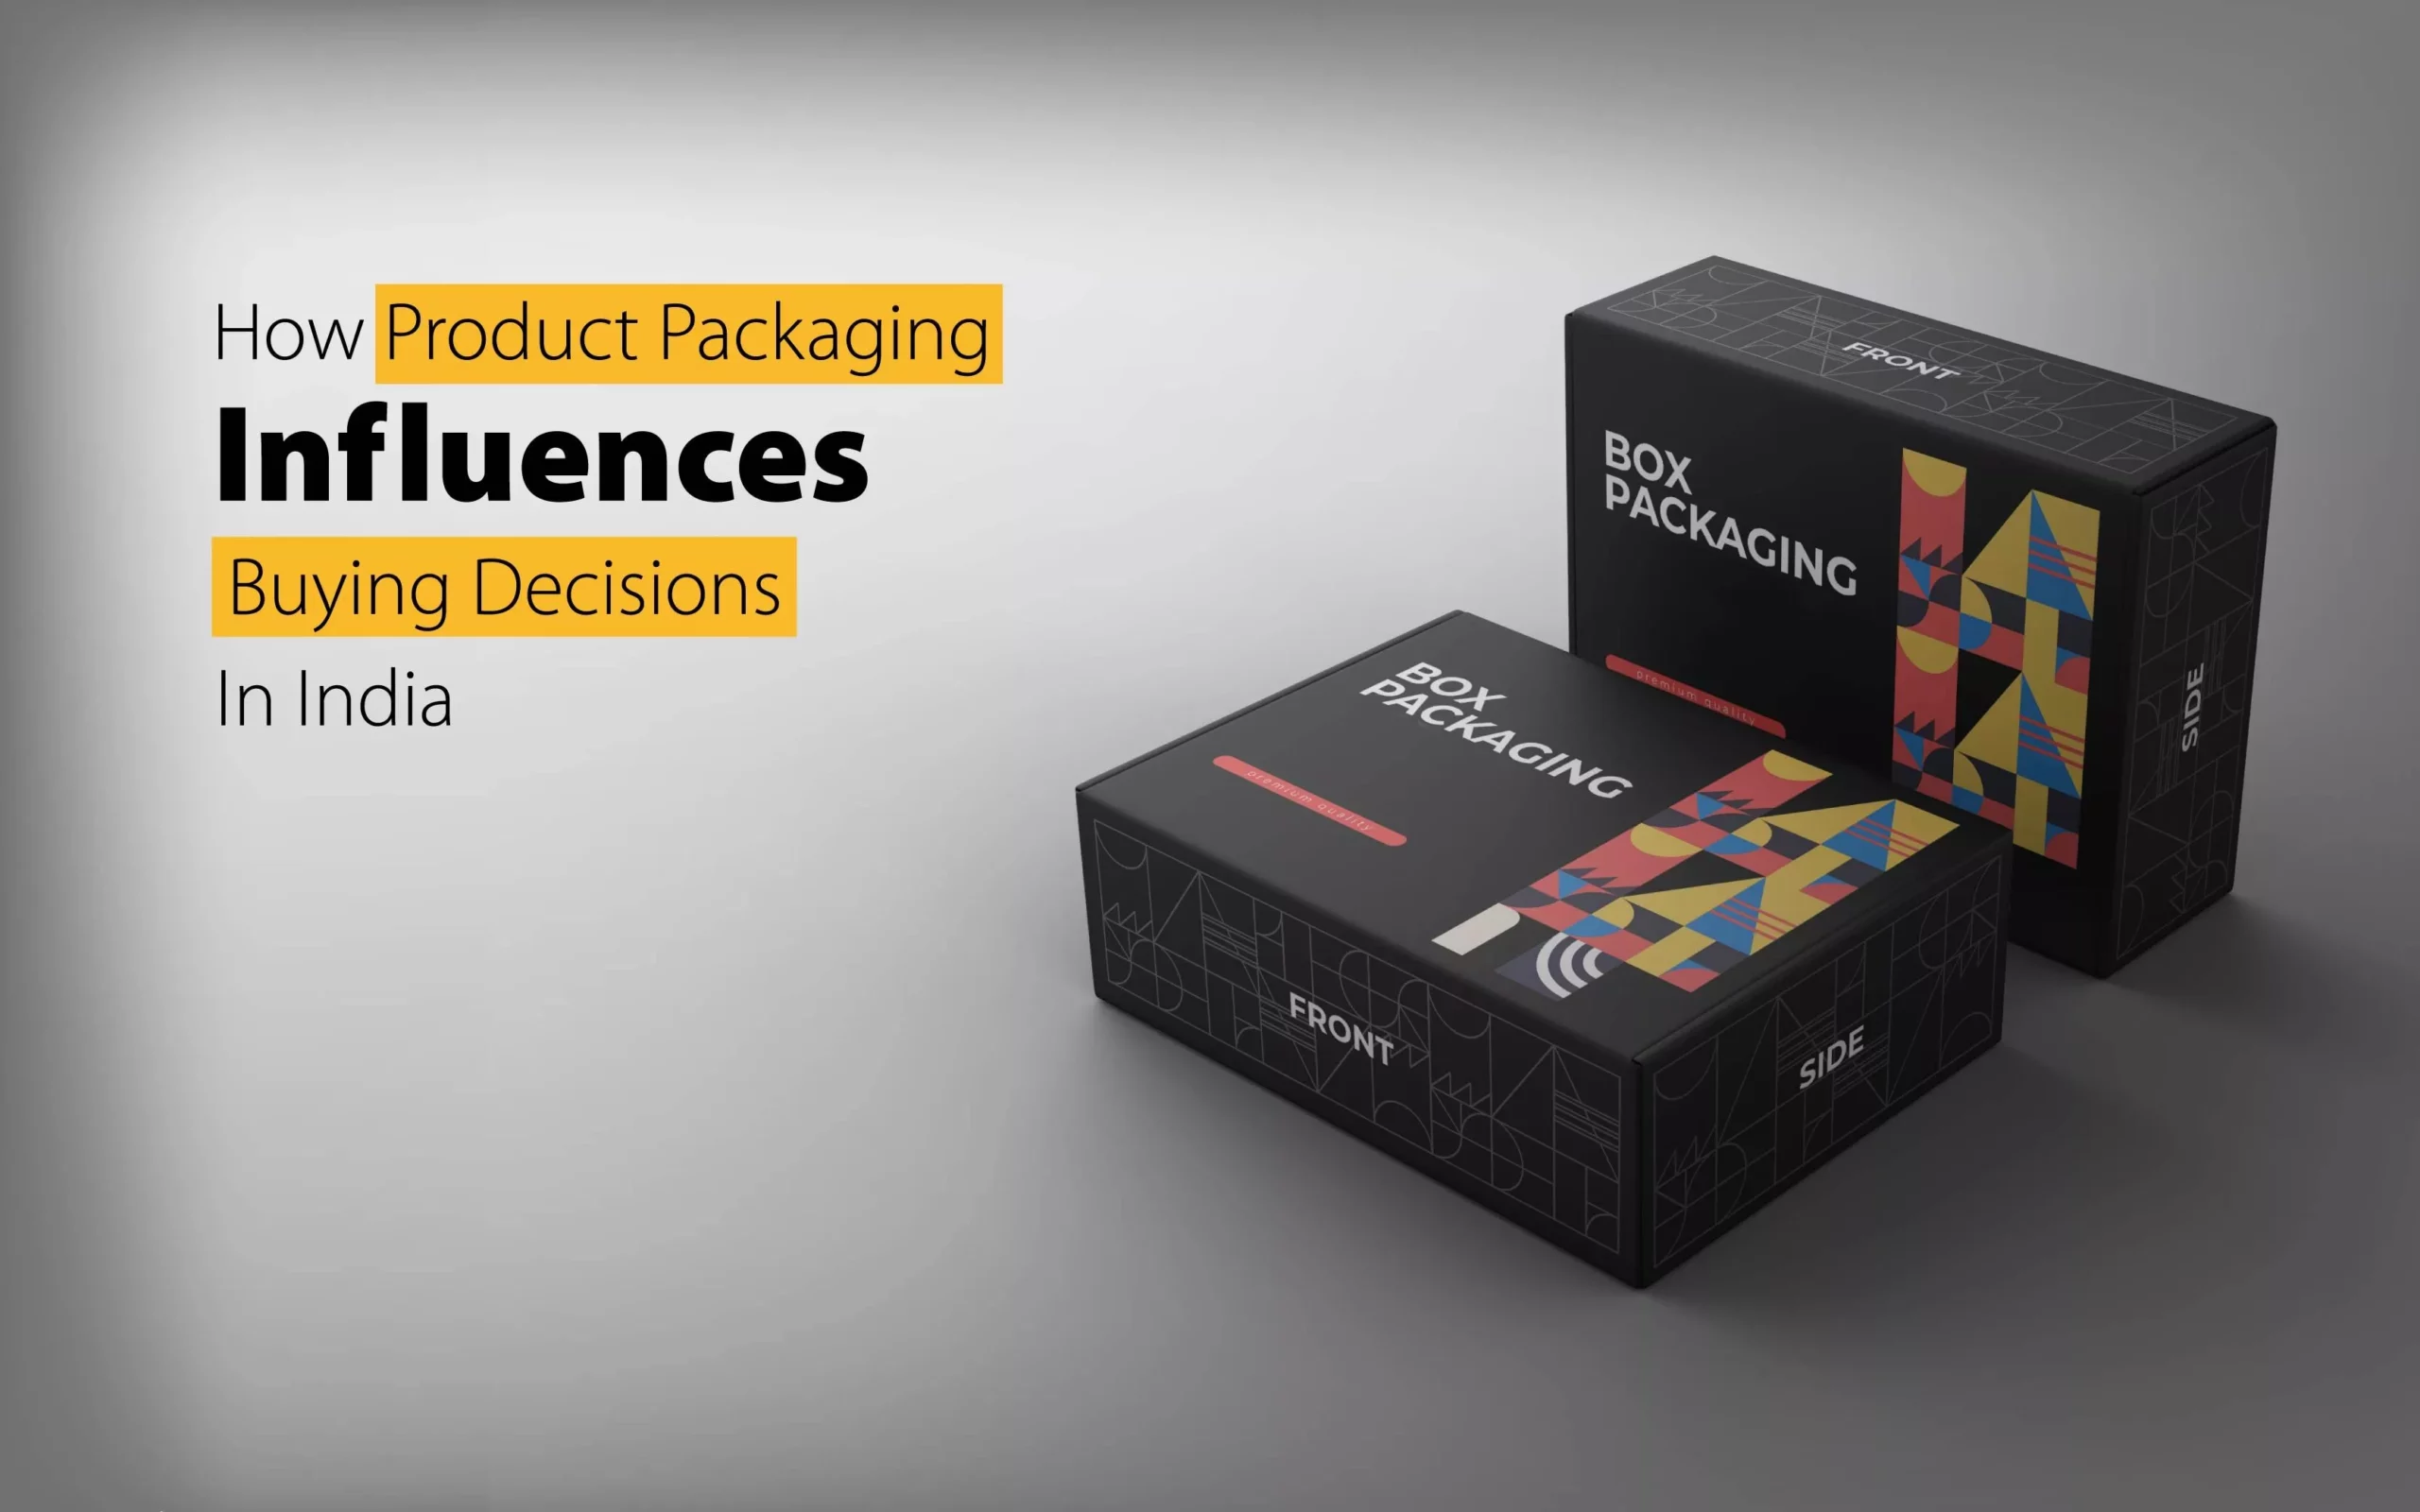 Unwrapping Success: How Product Packaging Influences Buying Decisions in India